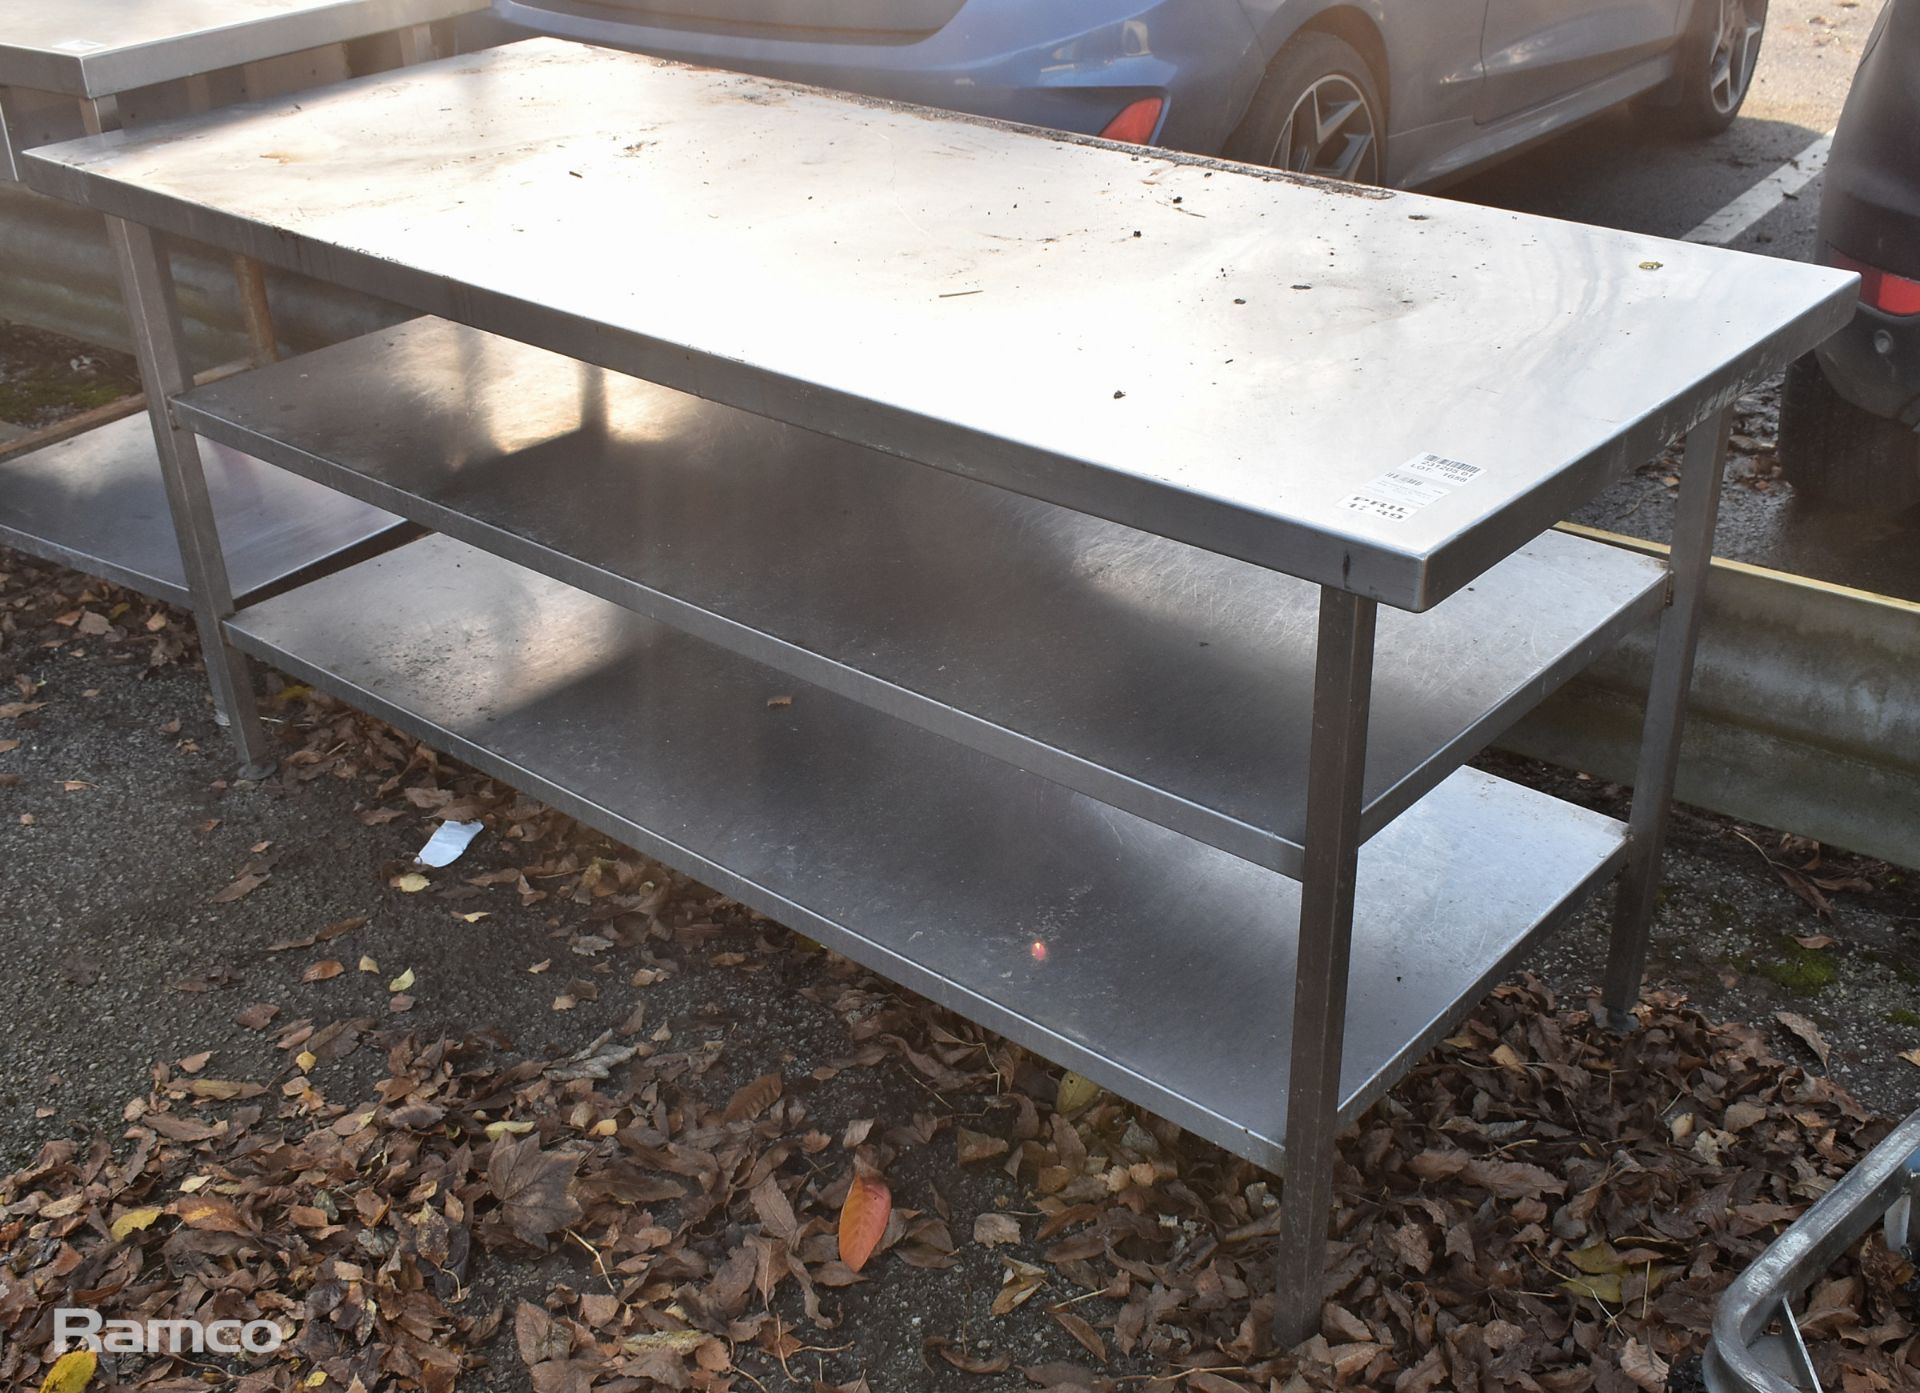 Stainless steel preparation table - L 1800 x W 750 x H 800mm - Image 2 of 3